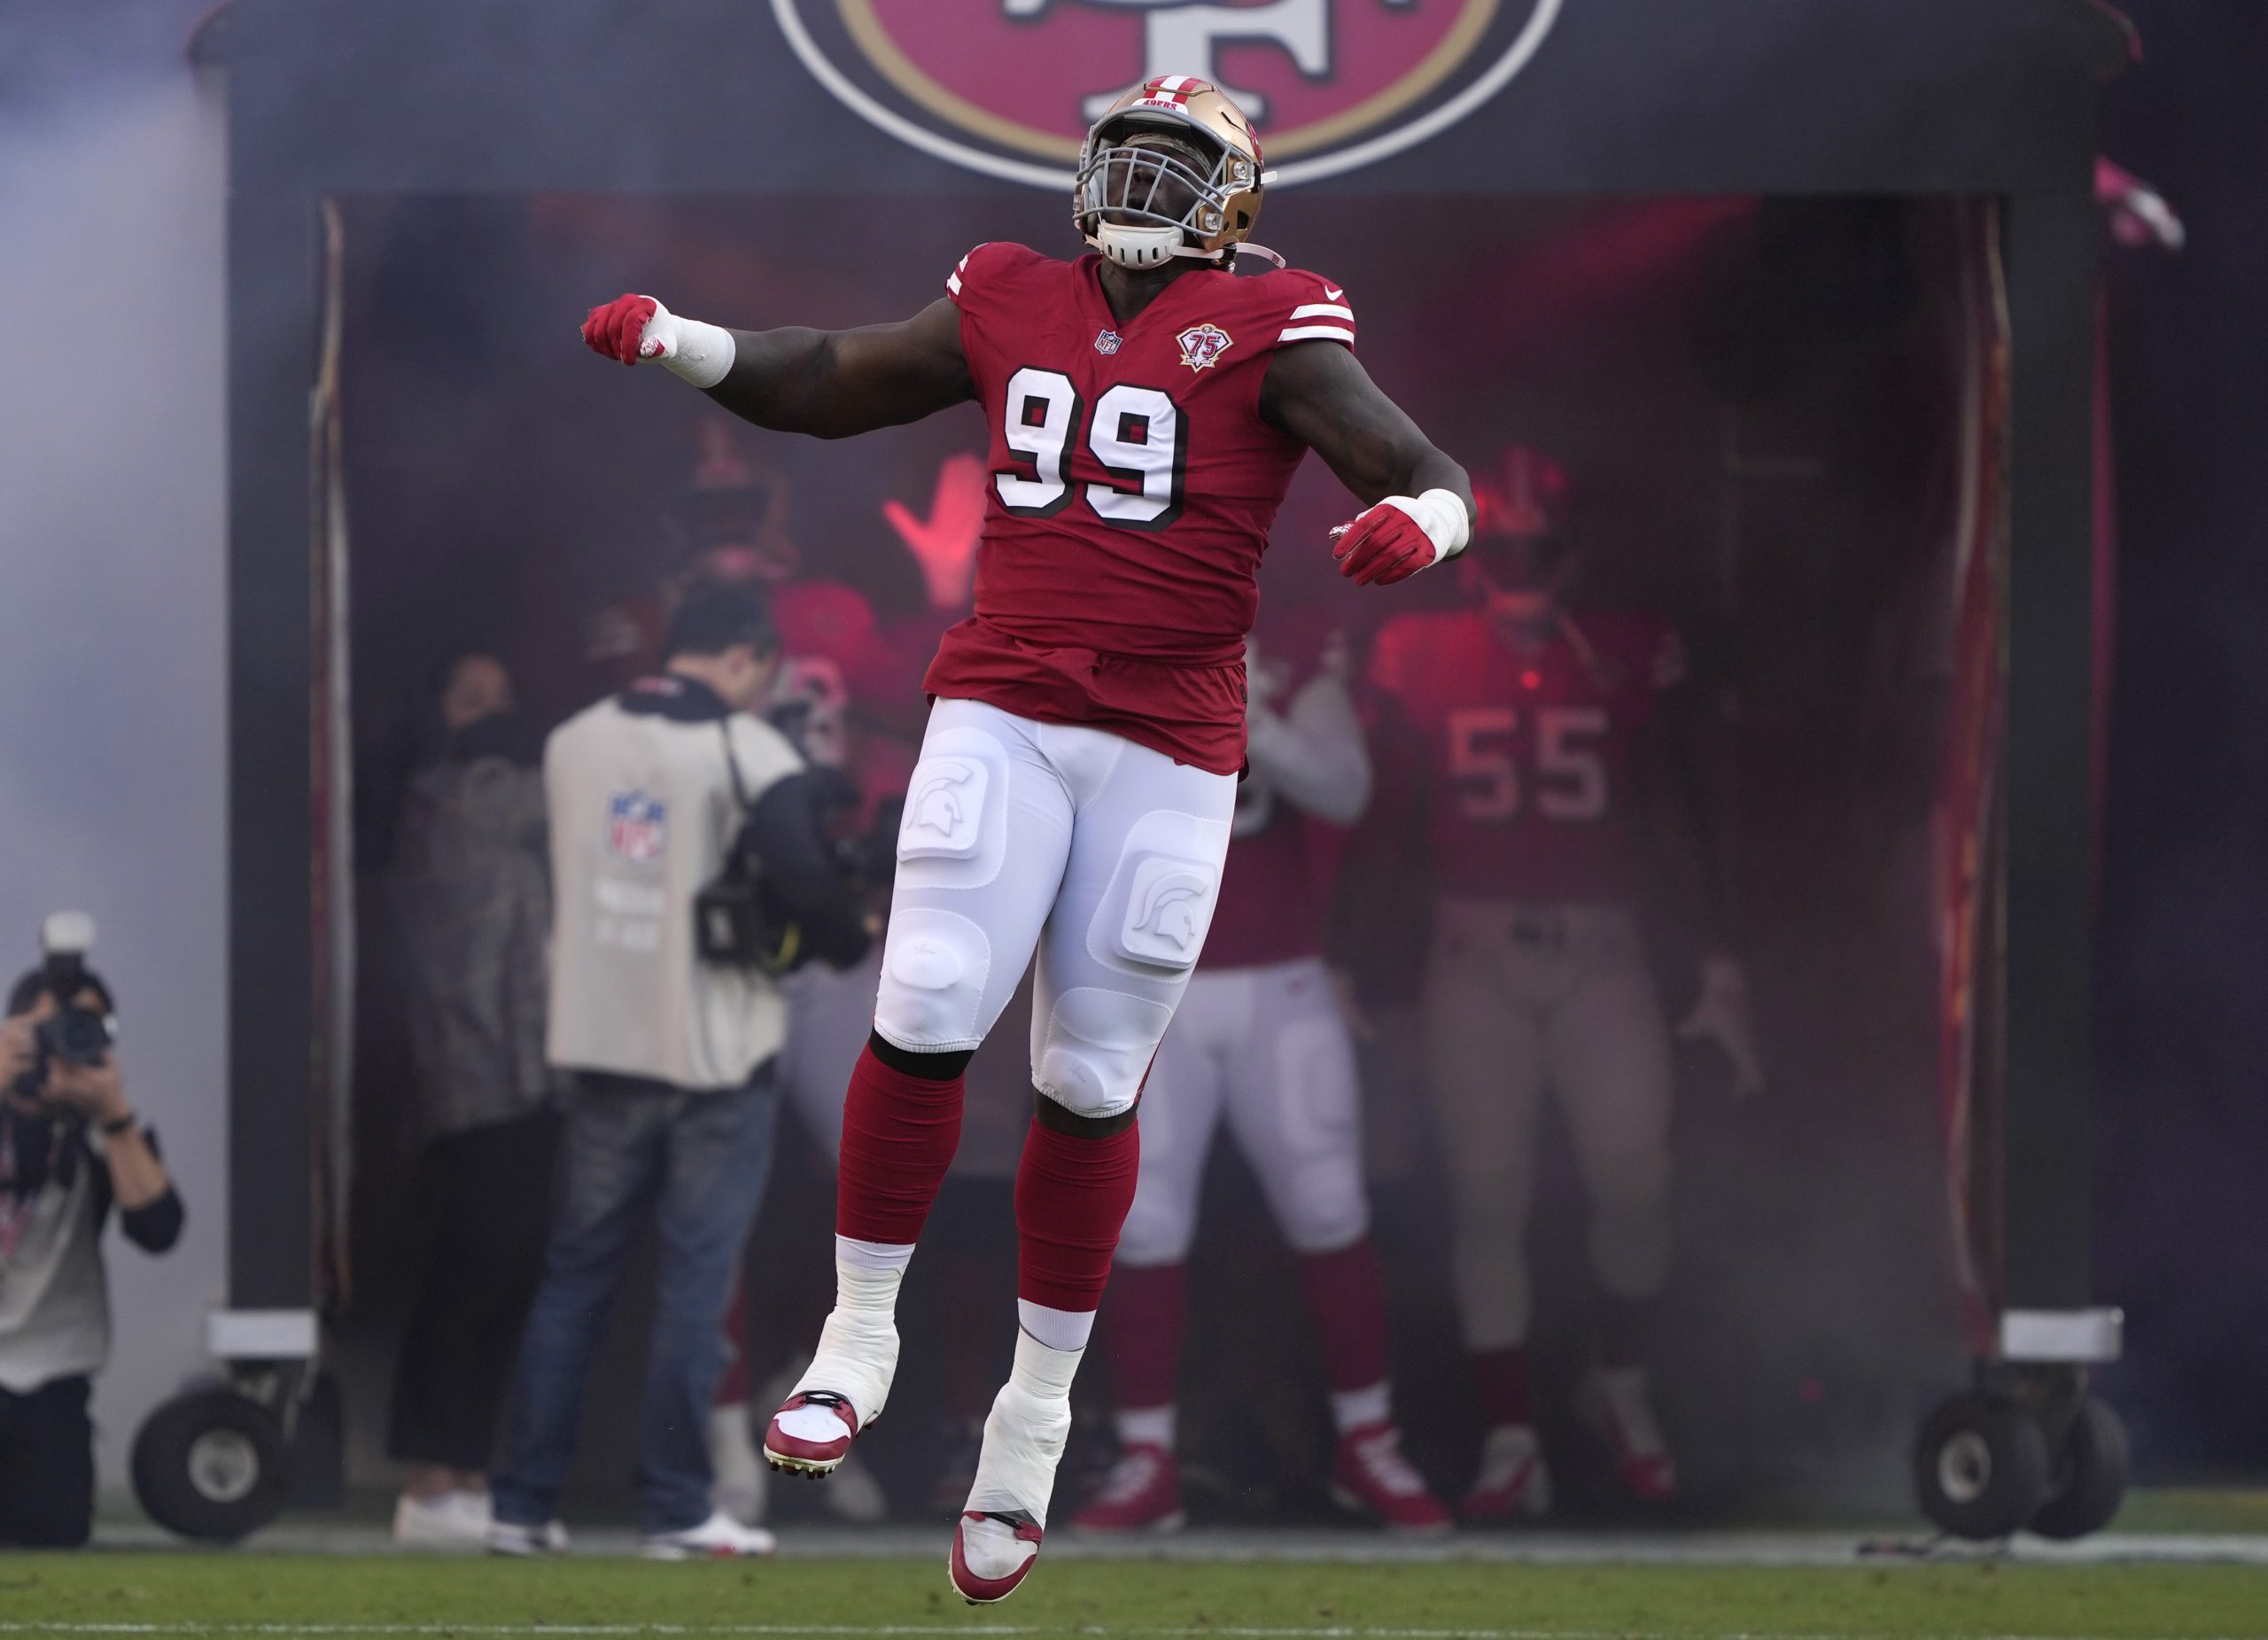 Javon Kinlaw #99 of the San Francisco 49ers takes the field prior to a game against the Green Bay P...